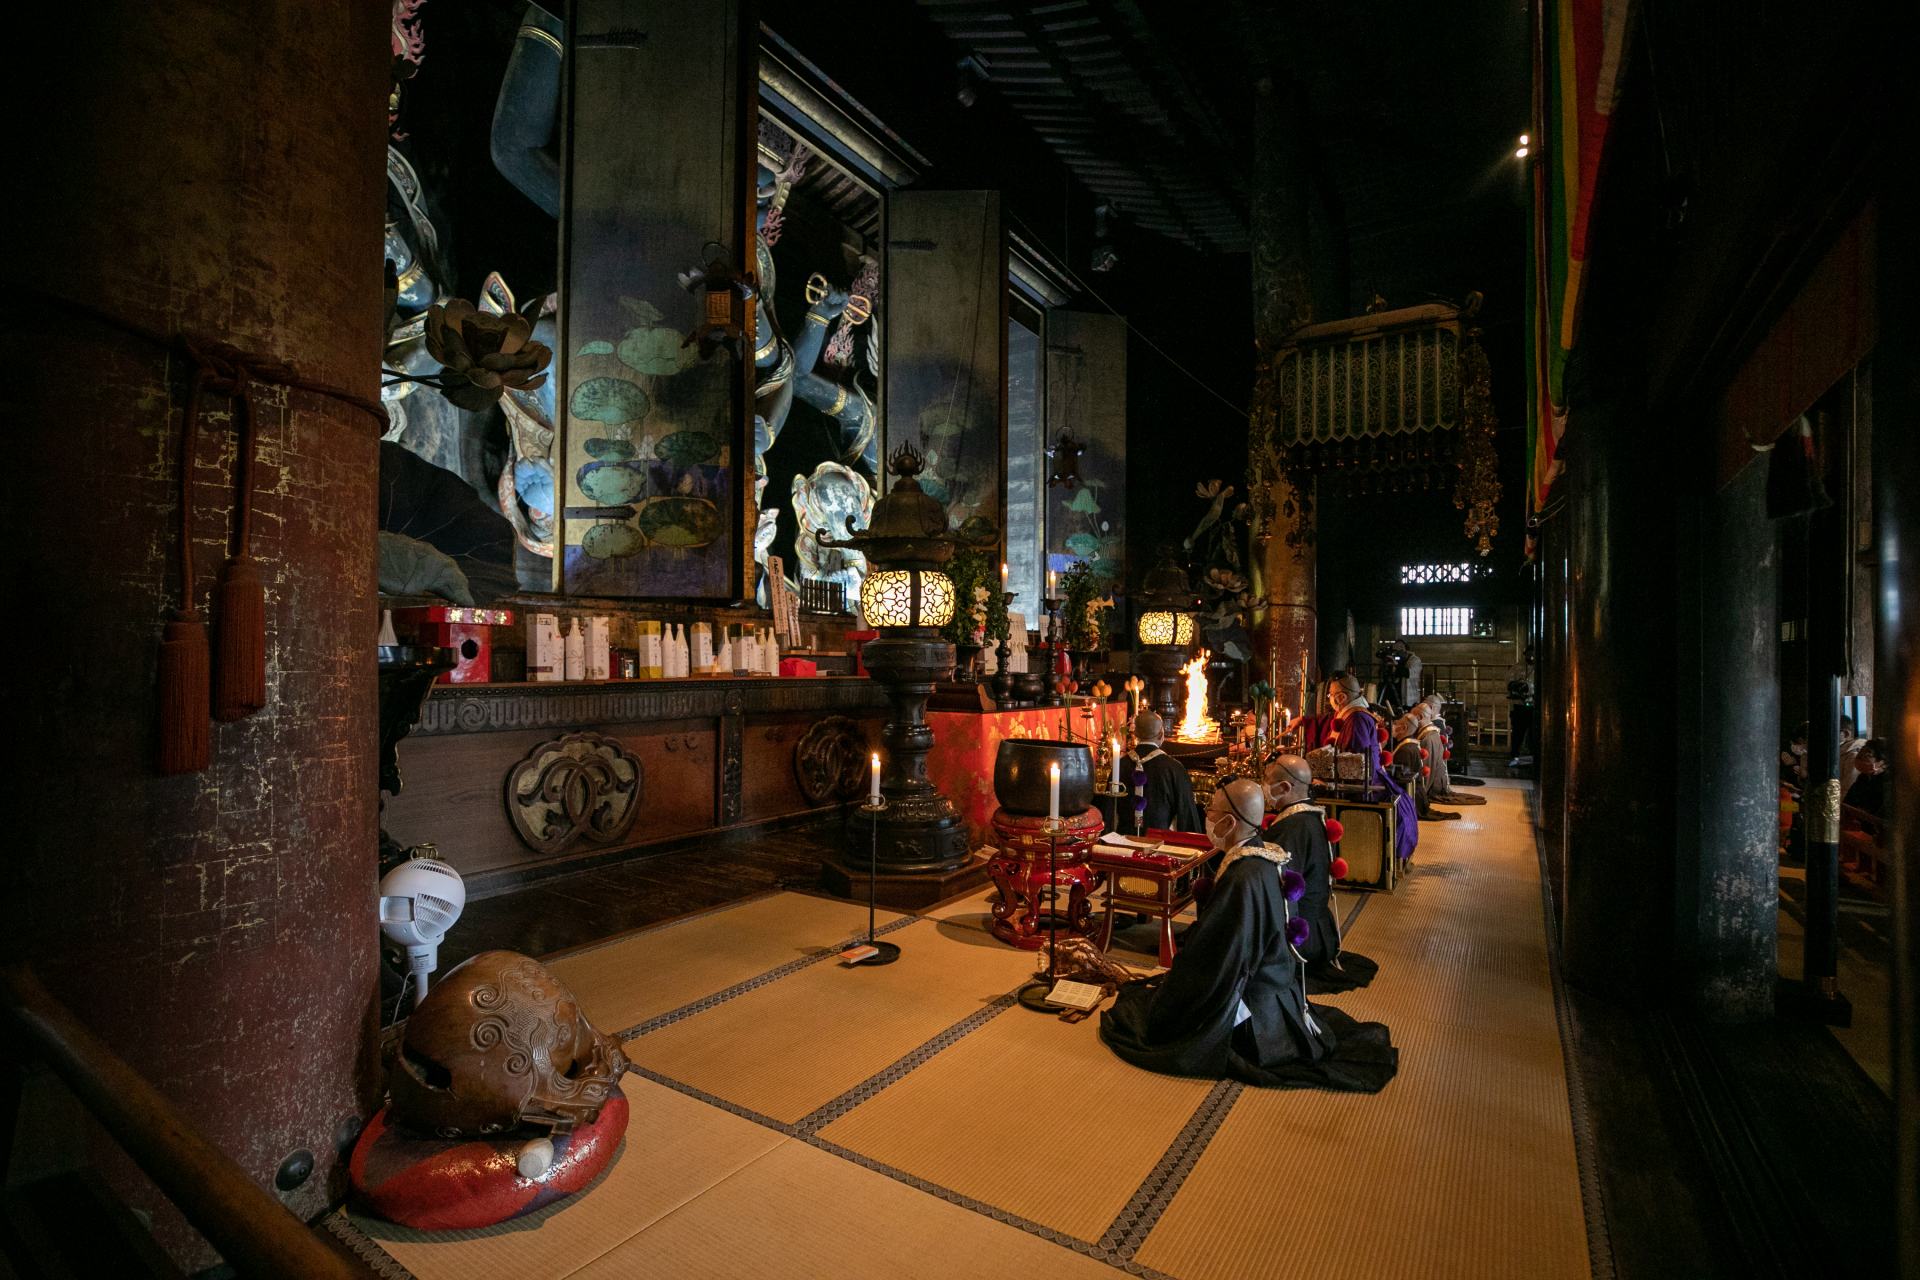 Kinpusenji’s Zao Gongen statues are enormous hibutsu (Buddhist statues usually hidden from public view). 
The central statue is 7.28 meters, while the statue on the right is 6.15 meters and the one on the left is 5.92 meters.